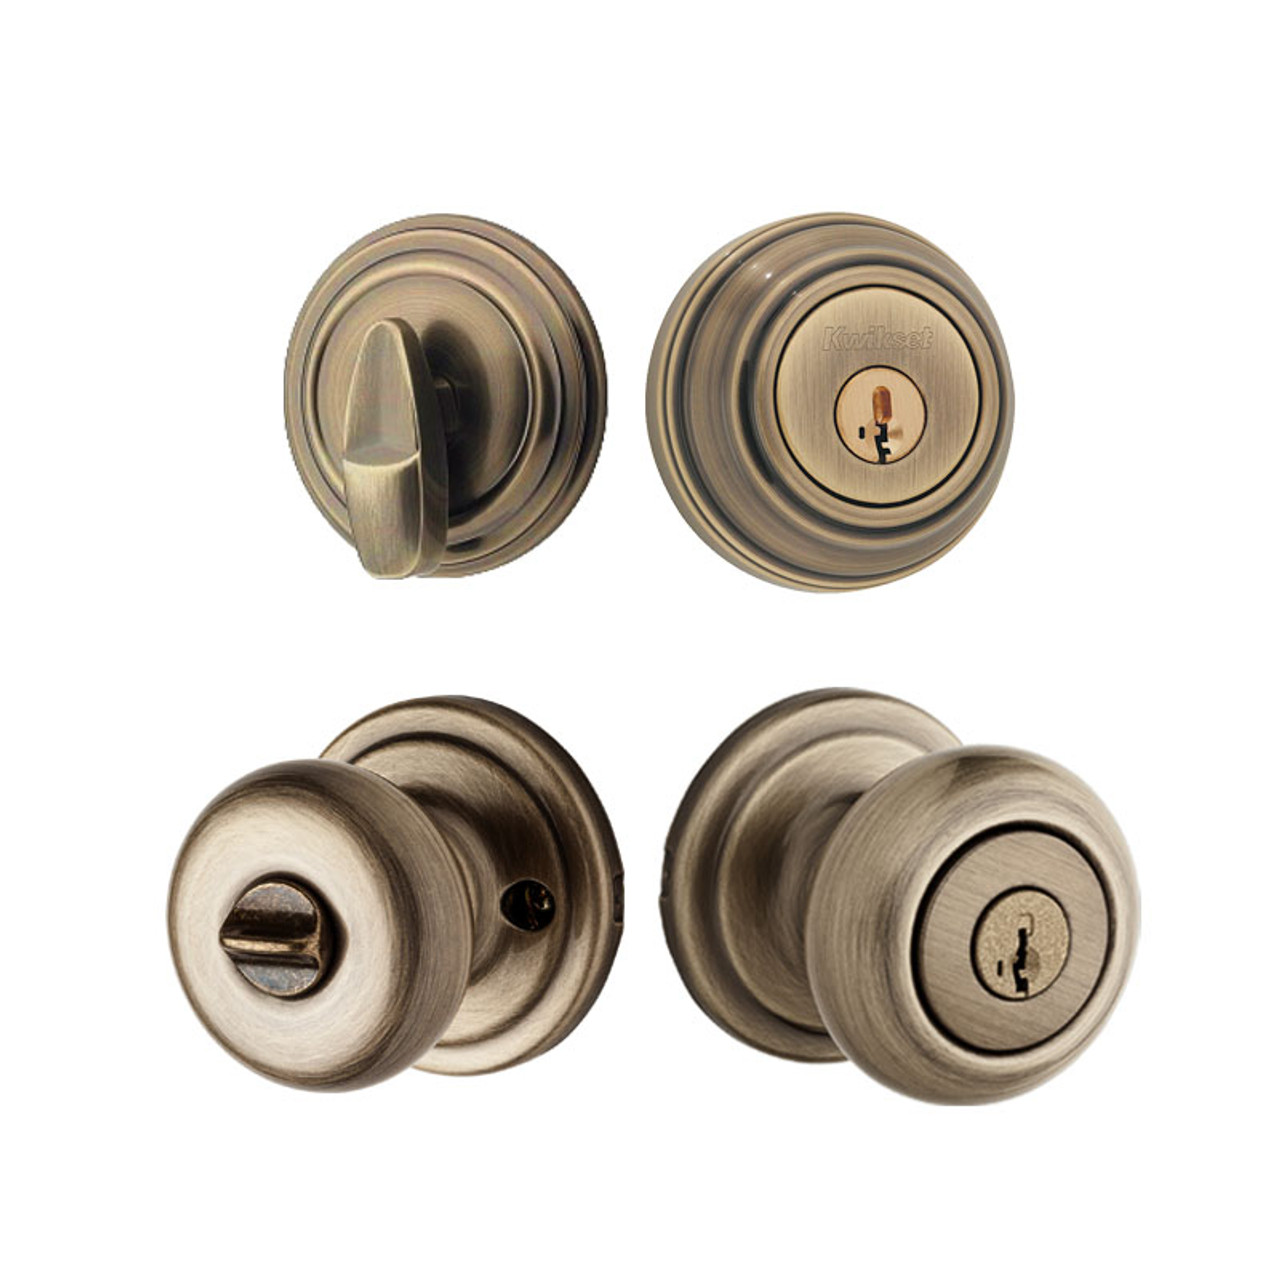 Kwikset Juno Knob with Single Cylinder Deadbolt Combo Pack